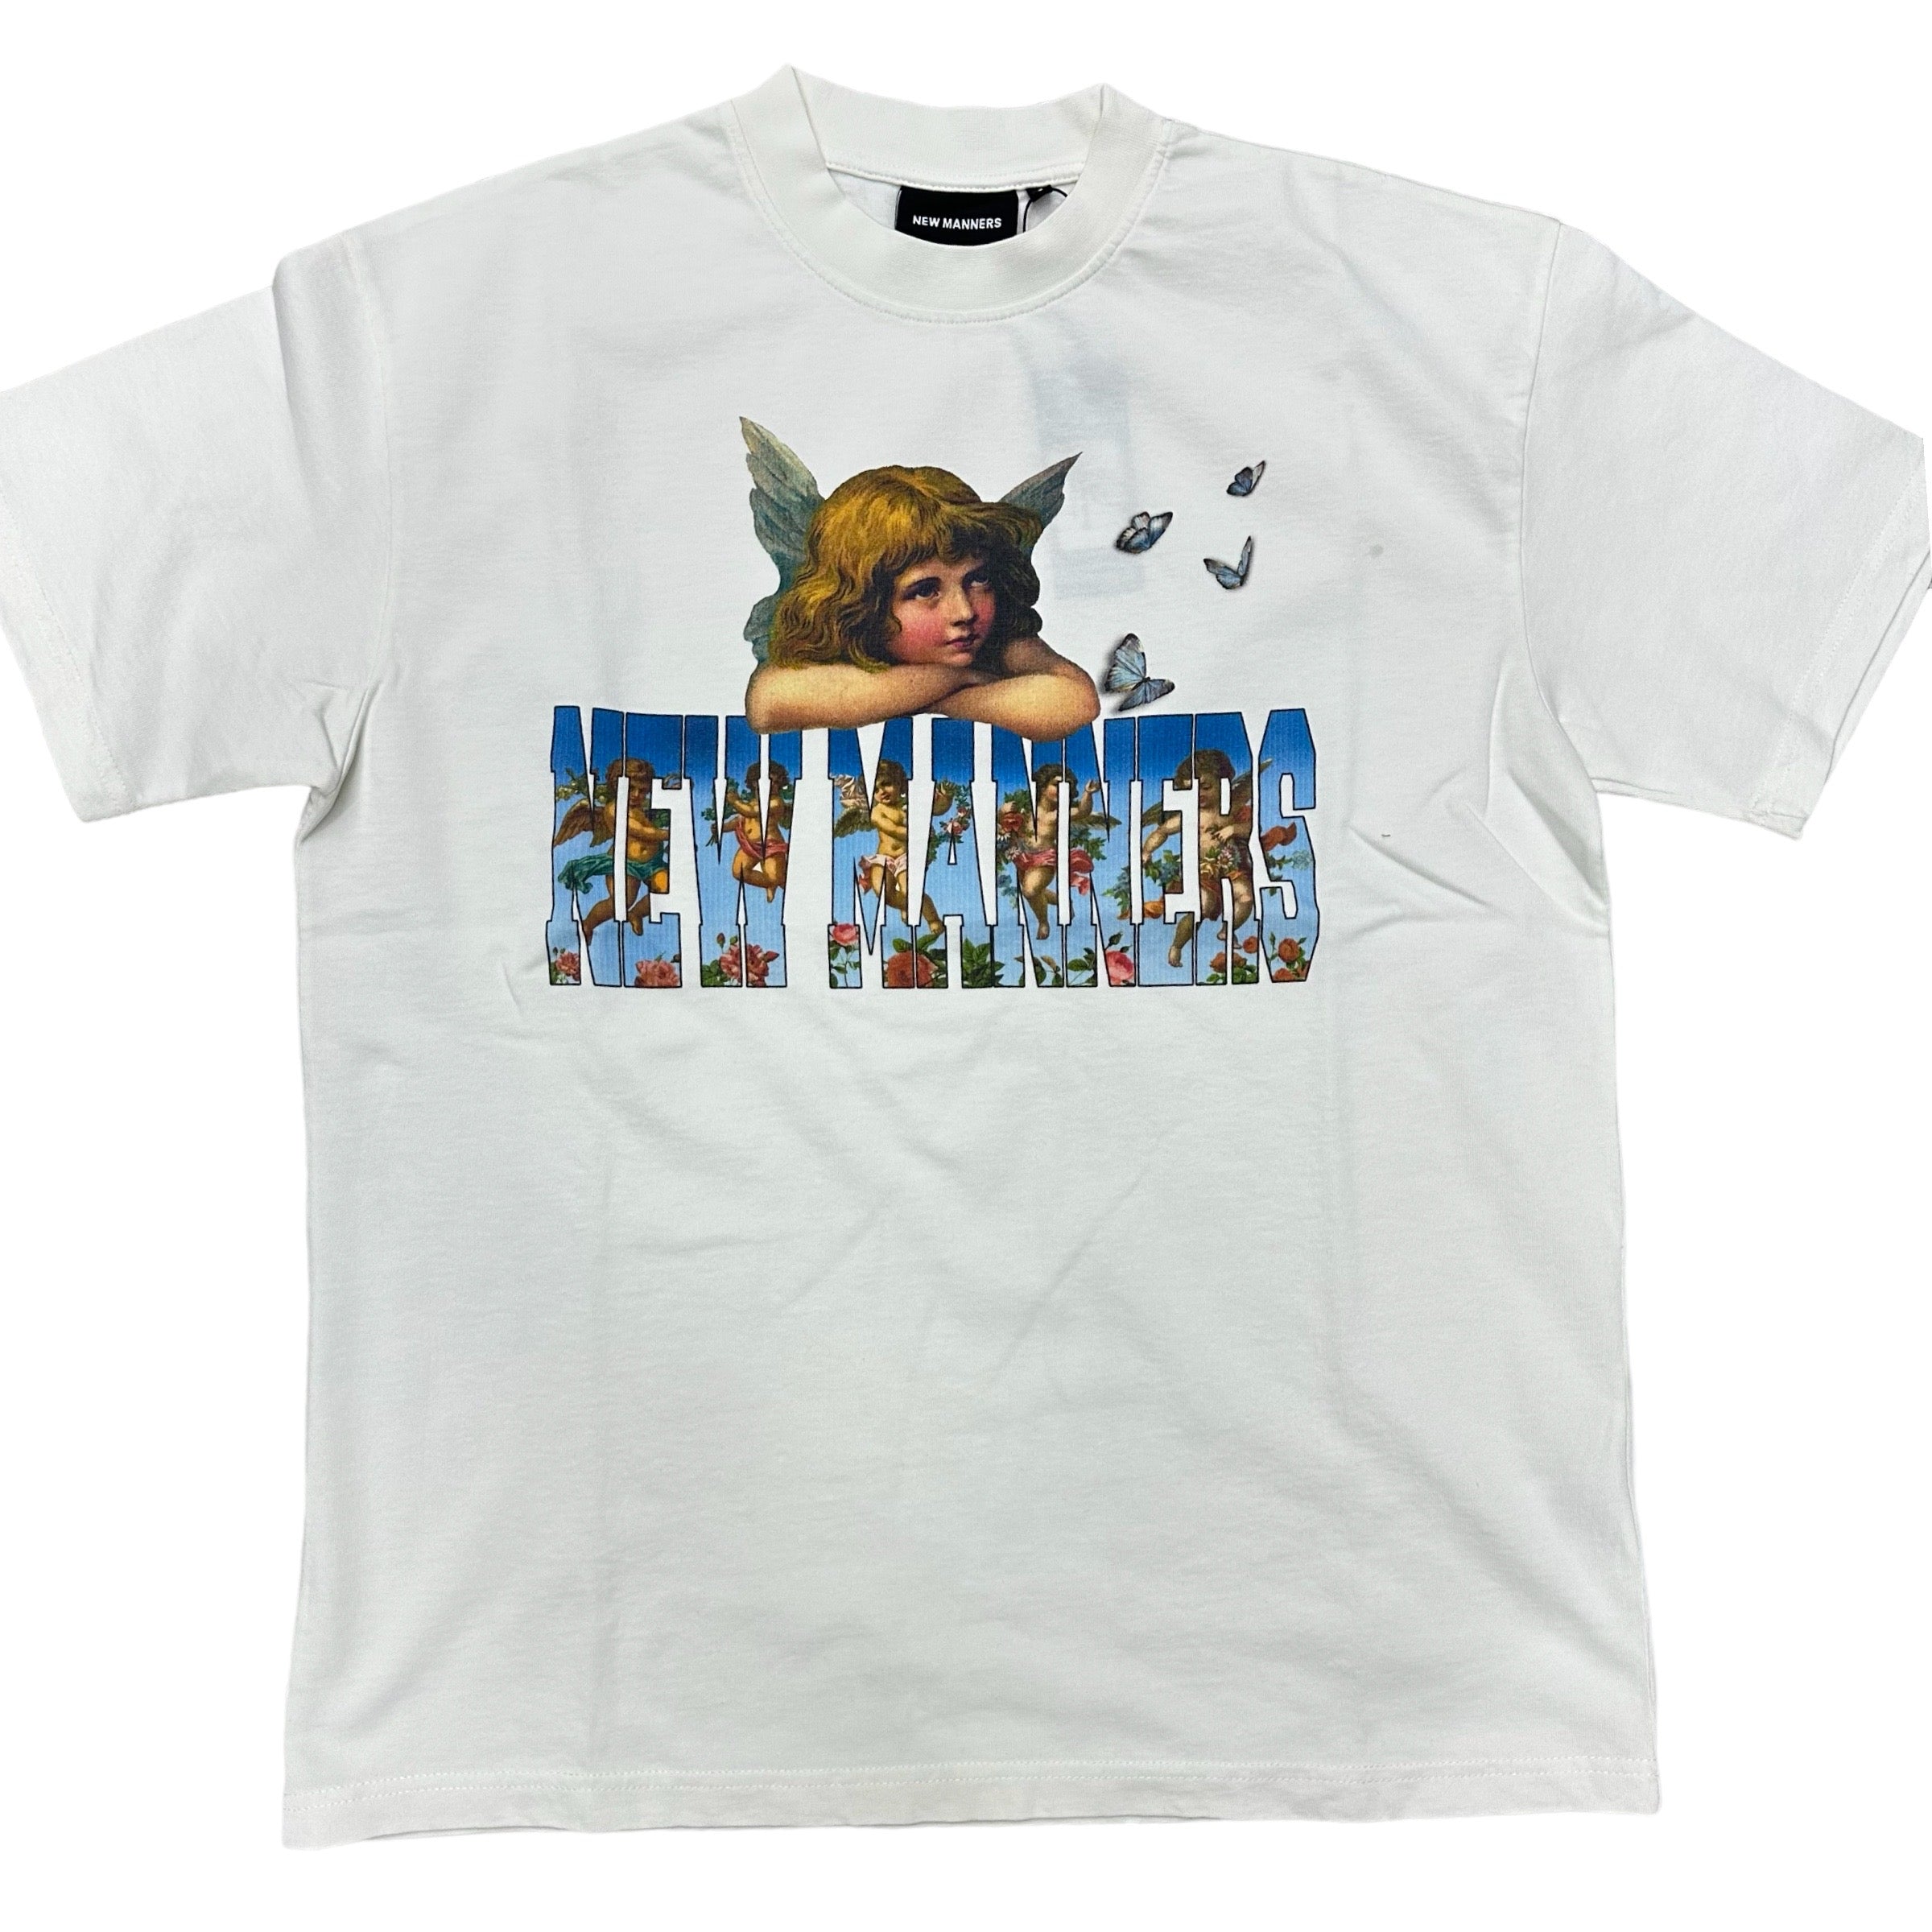 Manners OverSize Angel T-shirt White